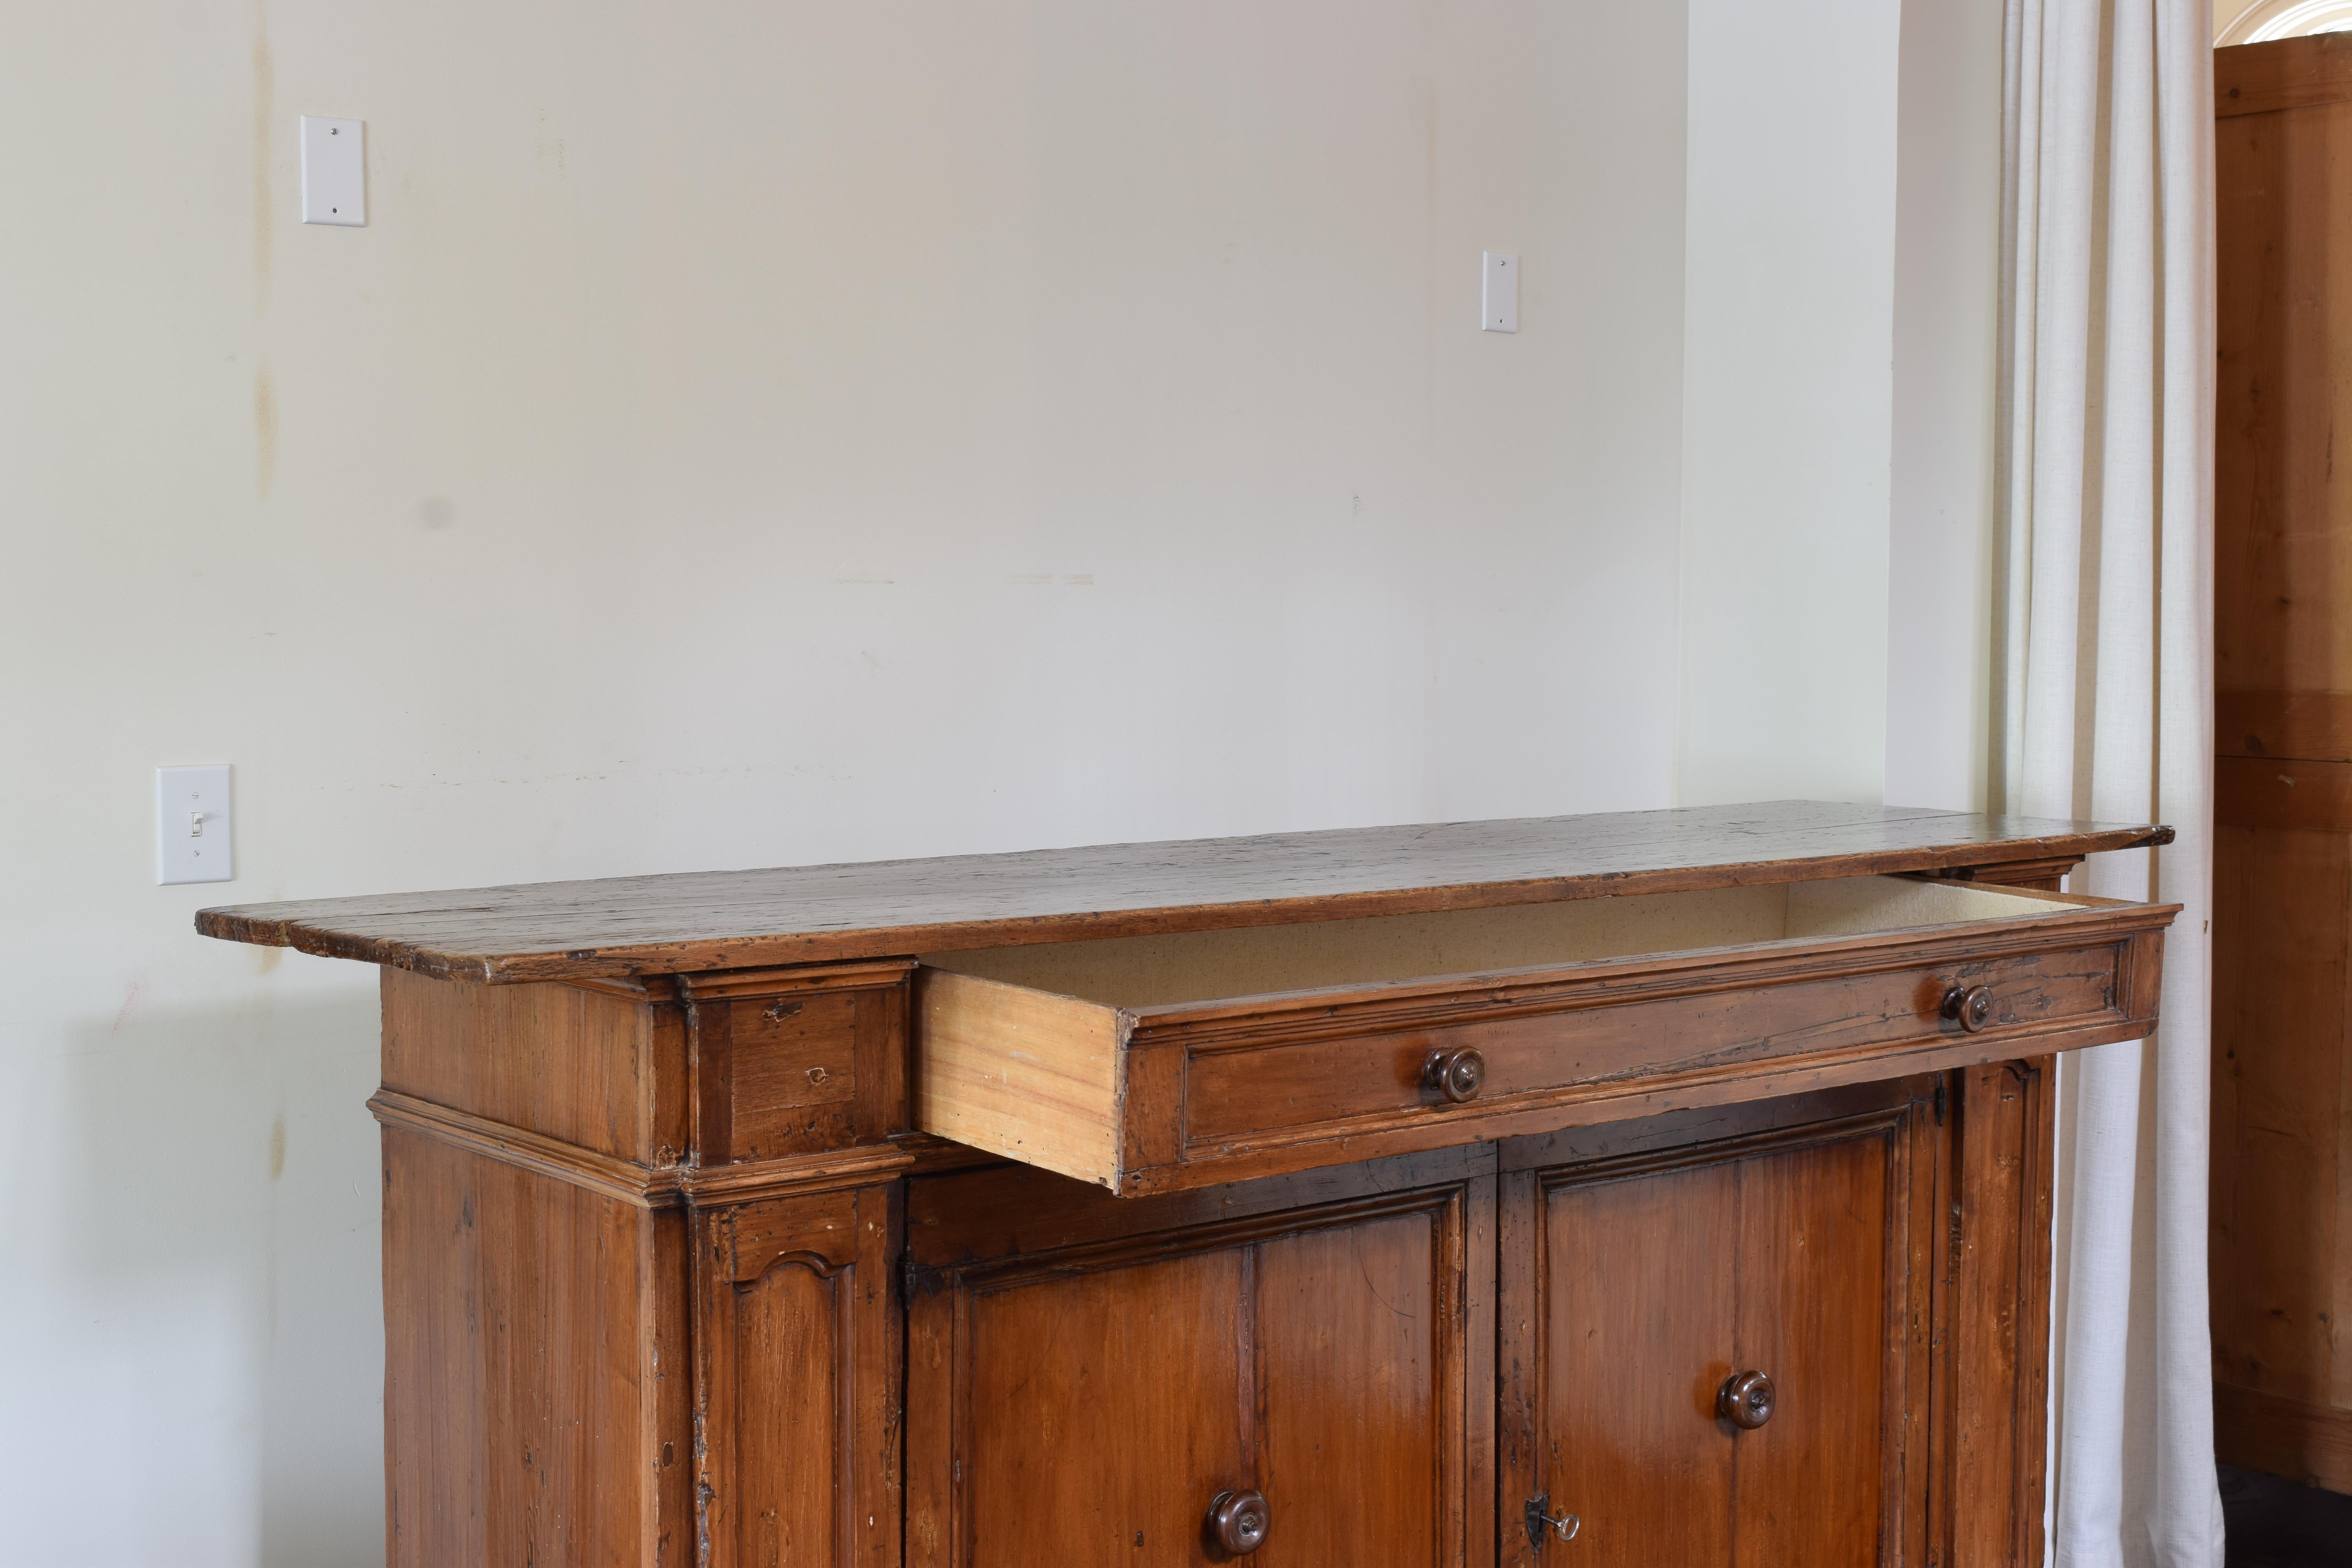 Italian Late Baroque Stained Fir-wood 1-Drawer, 2-Door Credenza, early 18th cen. For Sale 3